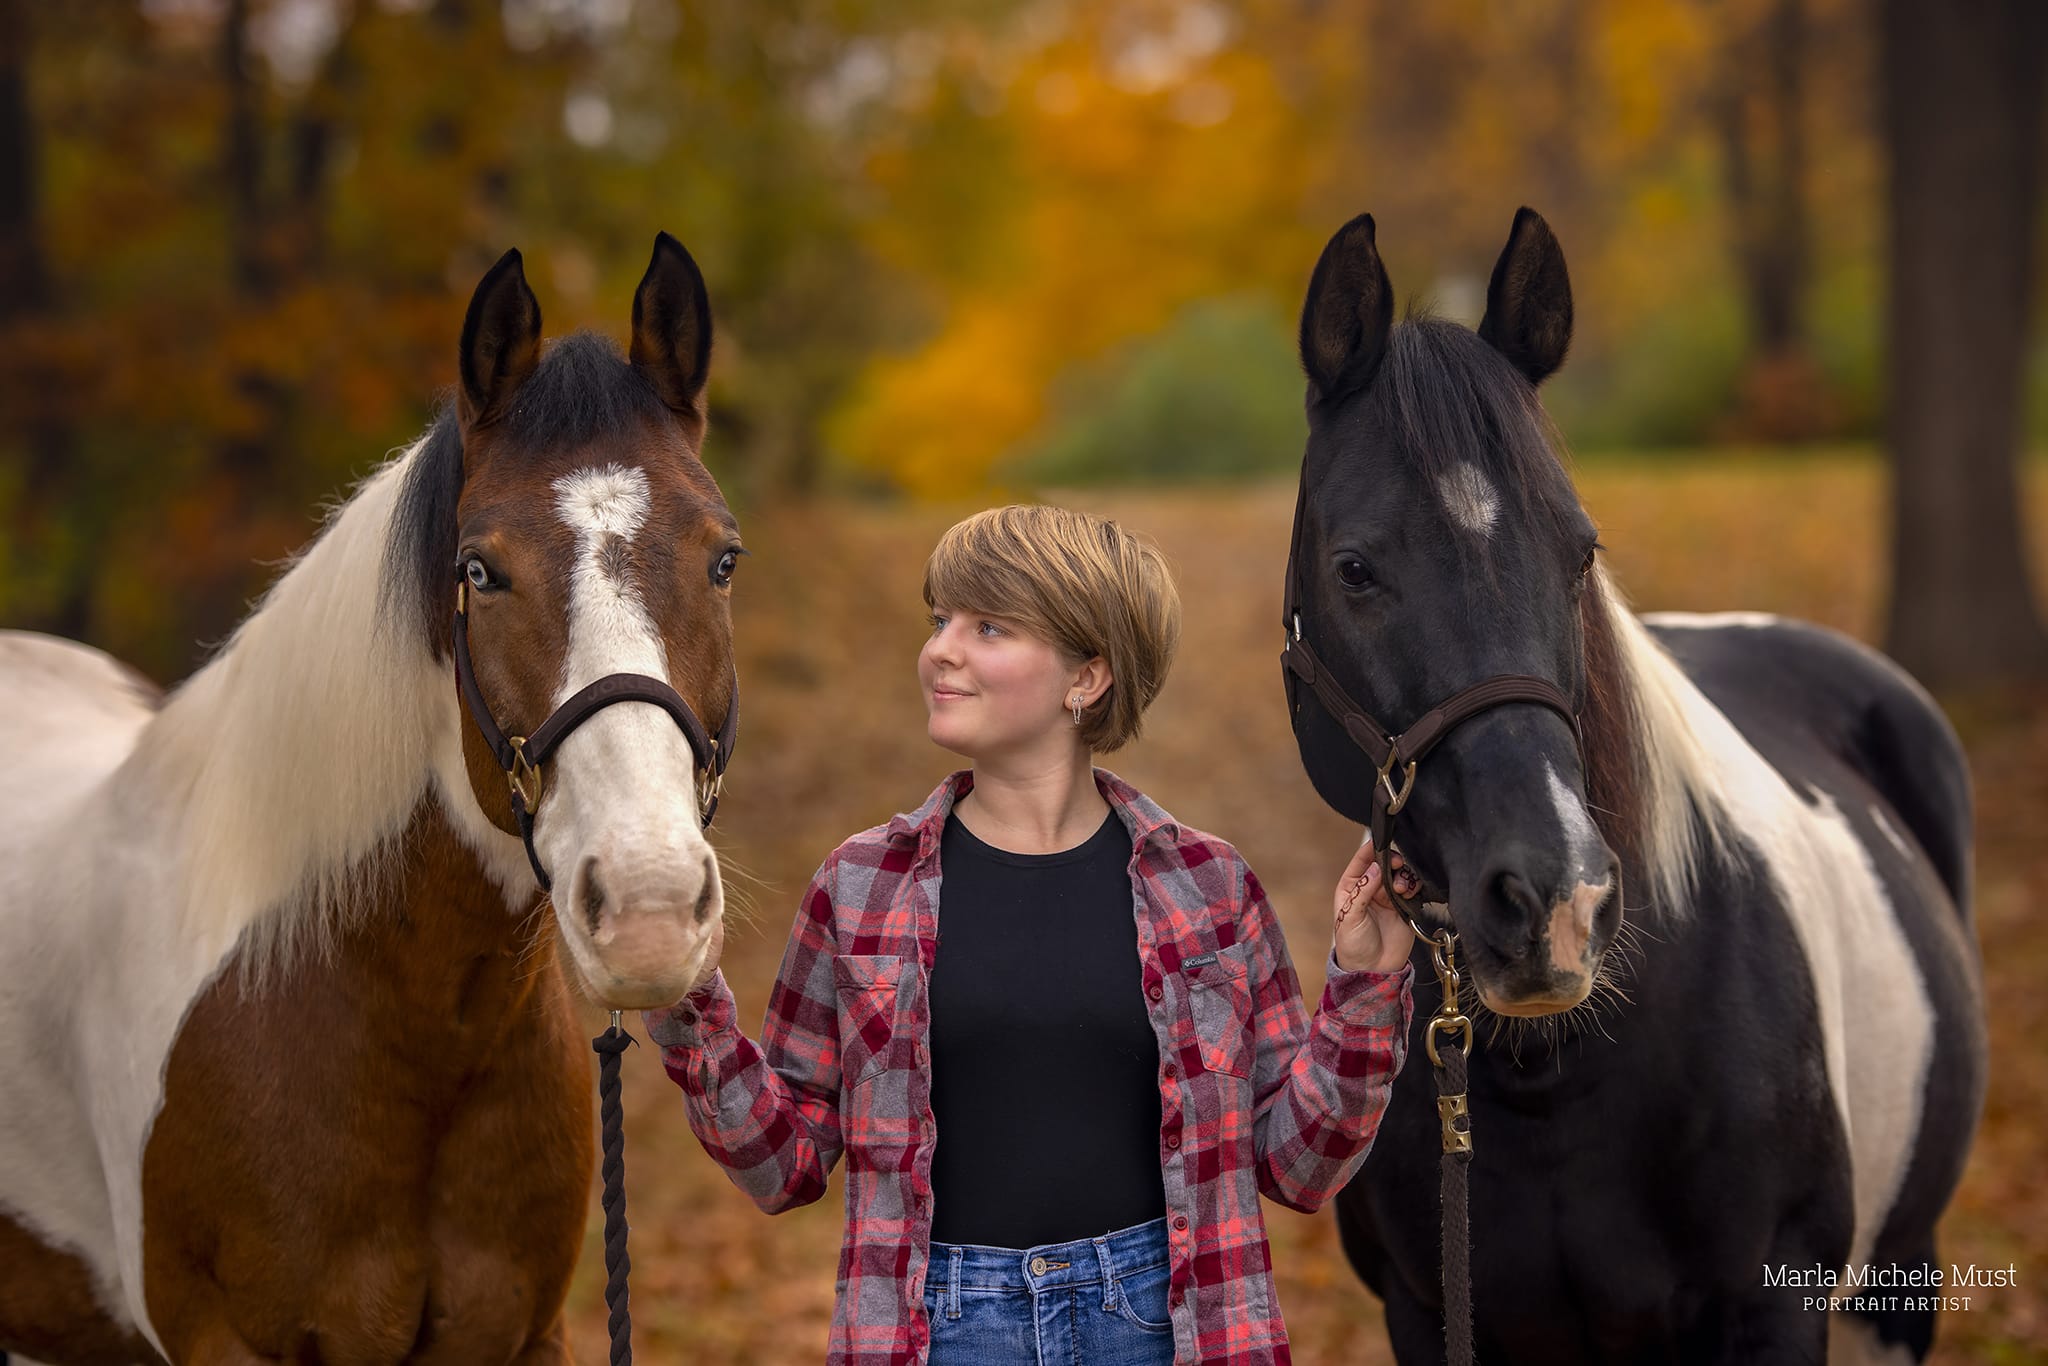 Detroit equine photographer's portrait: Horse owner confidently leading two horses on a trail, holding their reins, looking up at them lovingly.